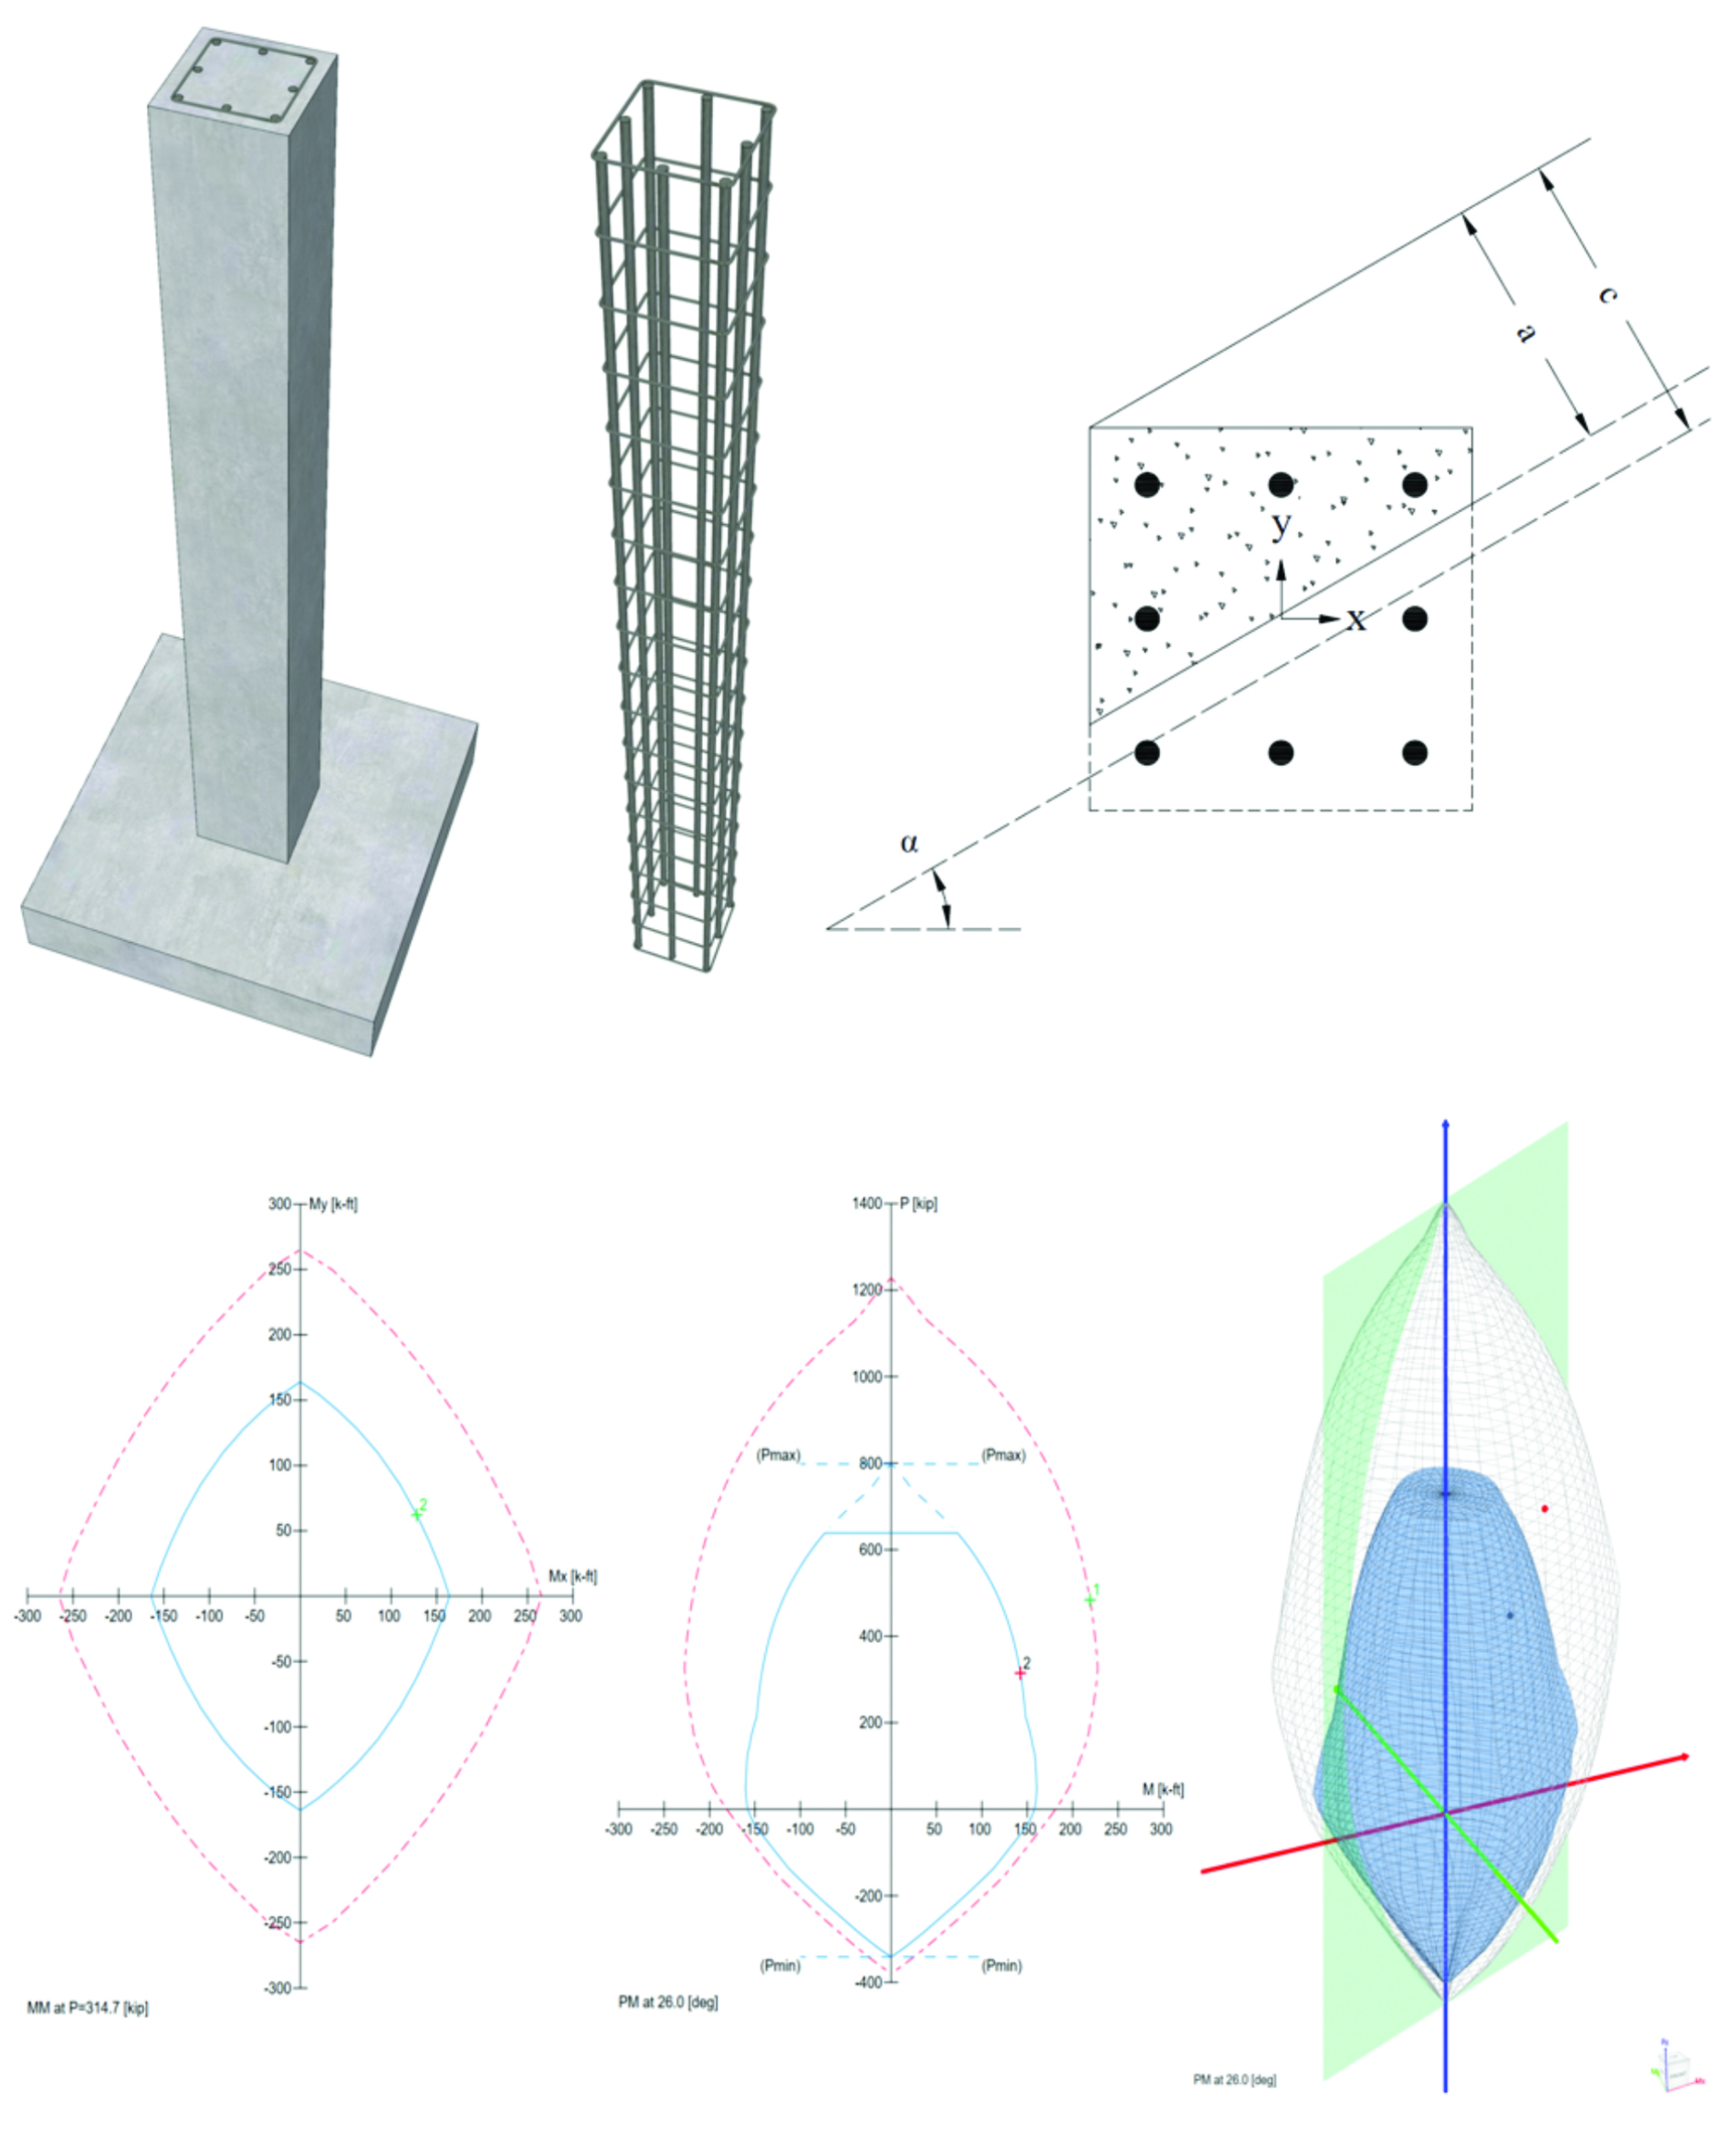 Combined Axial Force and Biaxial Bending 3D Failure Surface - Square Column